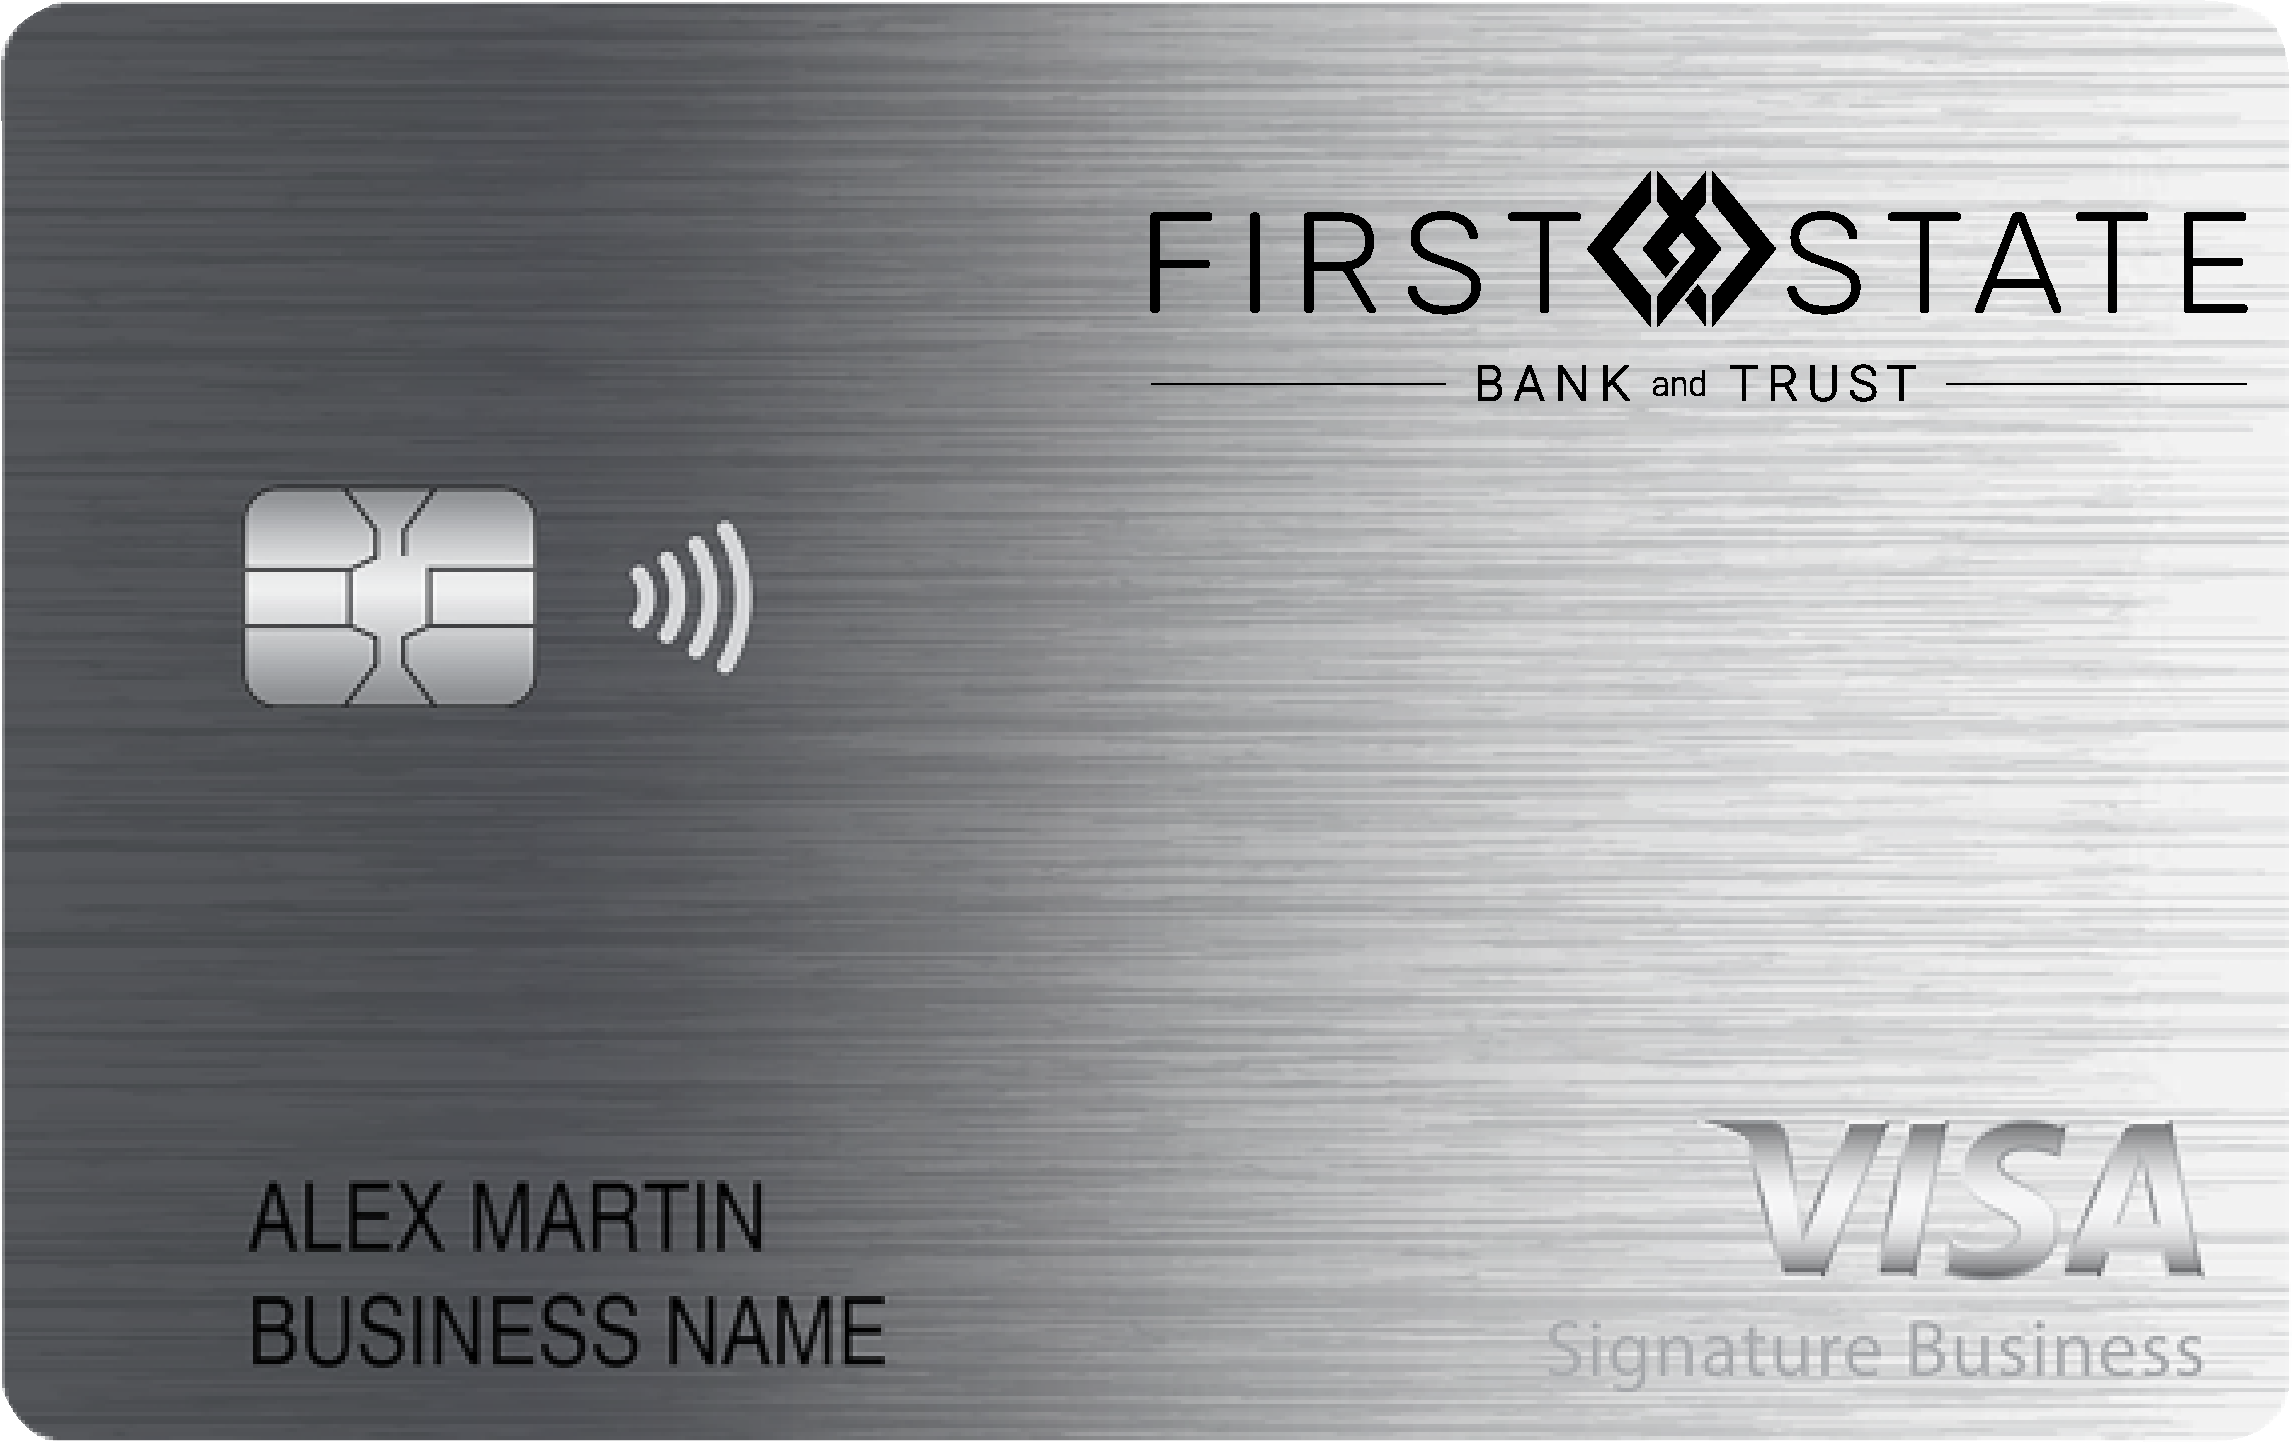 First State Bank and Trust Smart Business Rewards Card